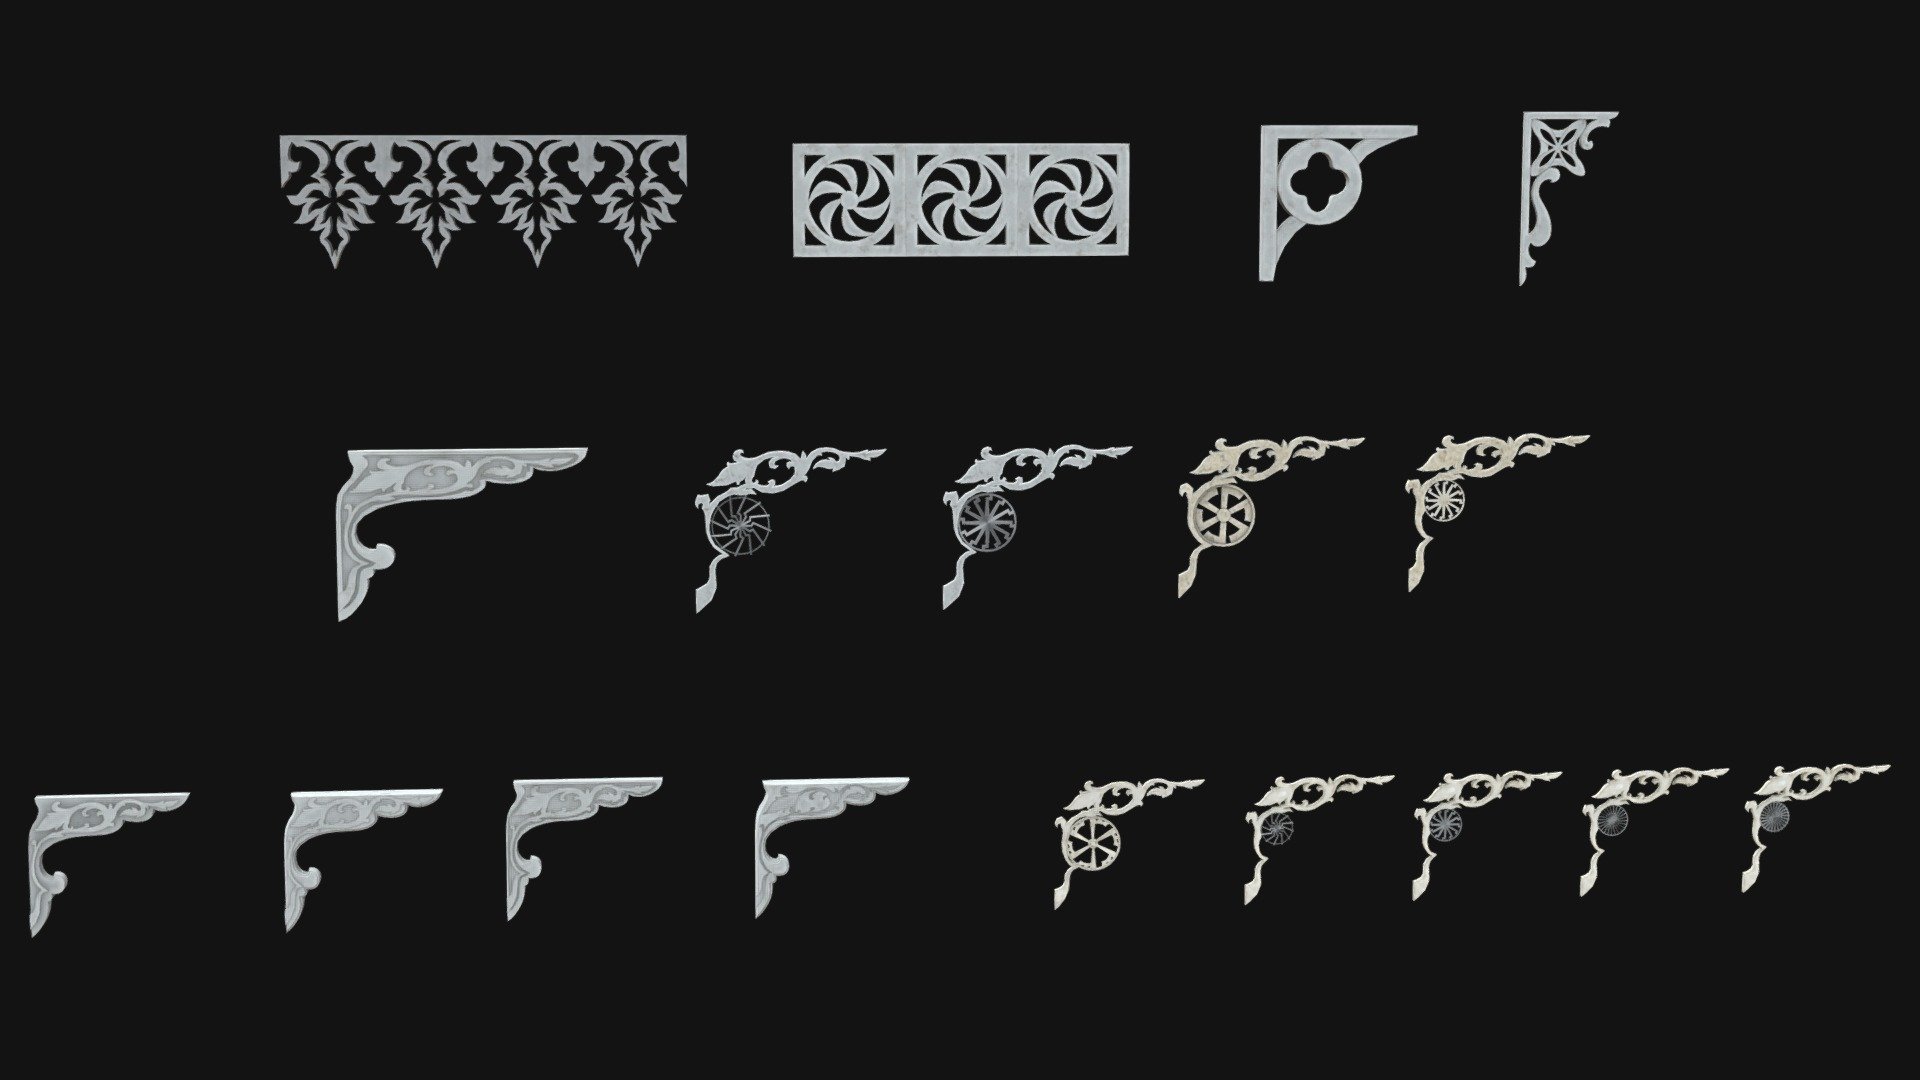 Collection of corbels (brackets, moldings, corner elements).

Some of them have old ethnic swastika symbols of culture like celtic, nordic, slavic, maybe indian. All objects is clean unwrapped(non-owerlapped) and ready for game engines. Geometry checked and have no n-gons, quads and tris only.

Archive include preview catalog and separated named FBX and OBJ files 3d model